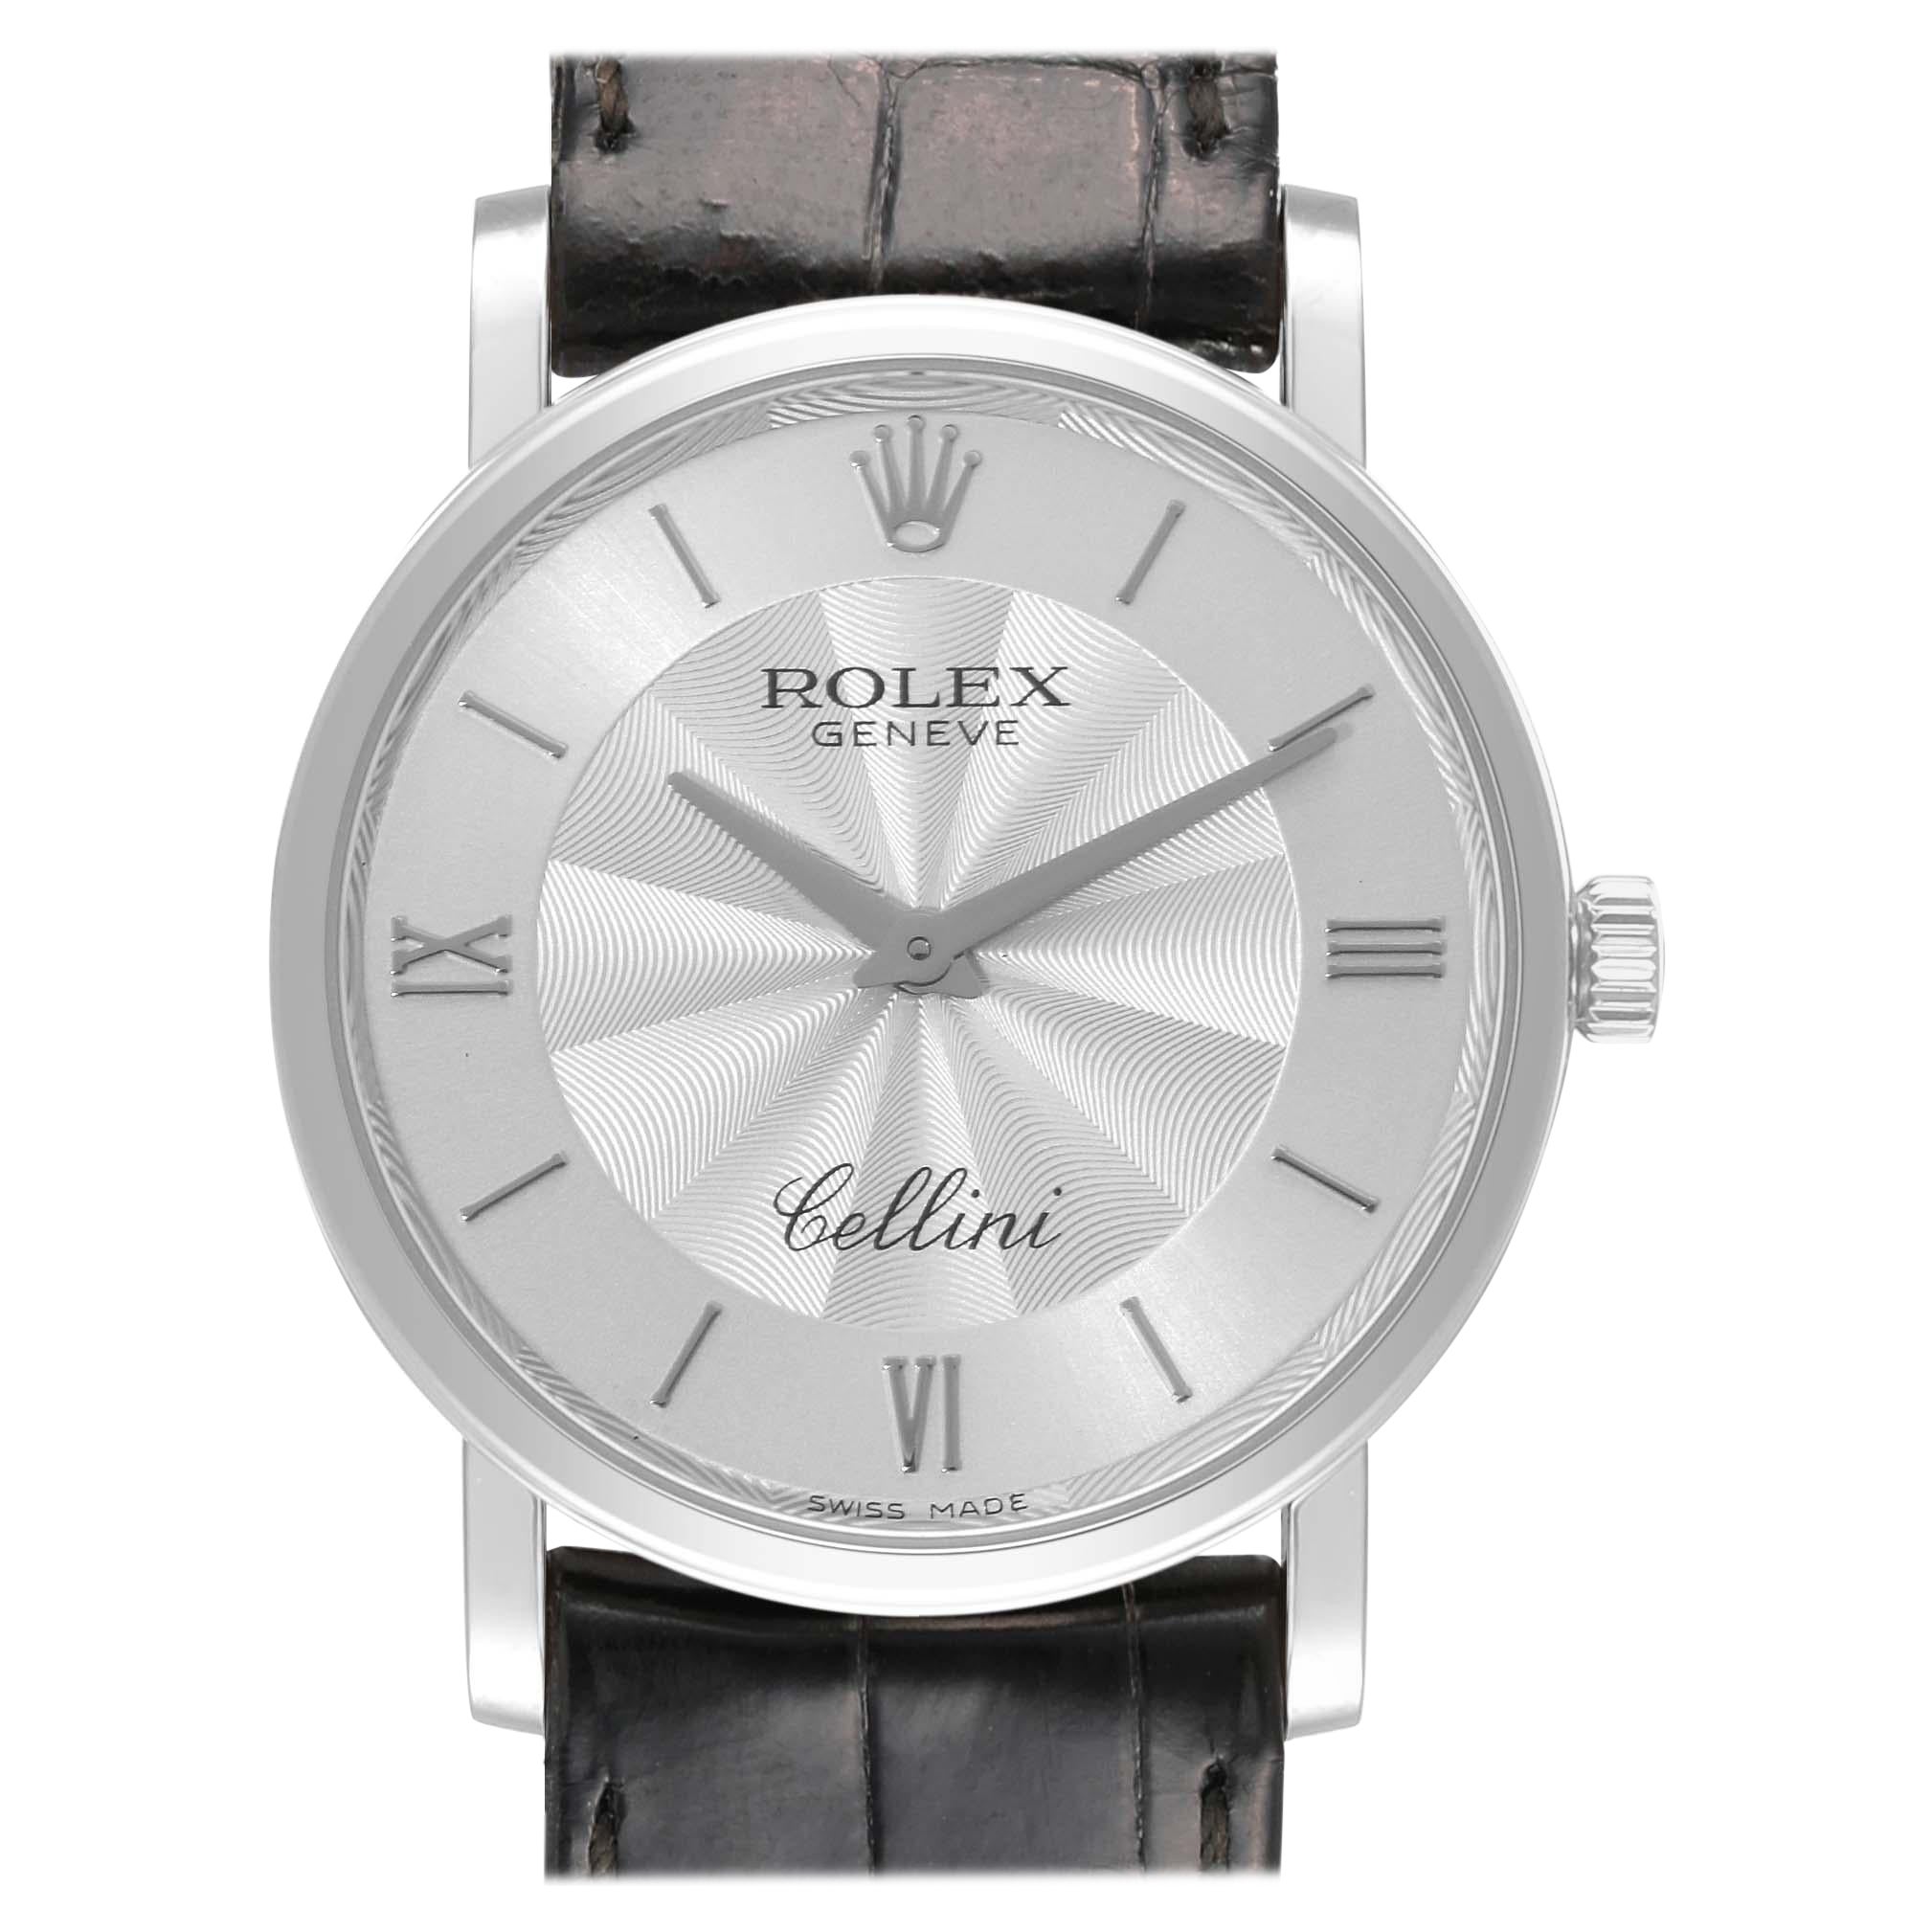 Rolex Cellini Classic White Gold Decorated Silver Dial Mens Watch 5115 Unworn